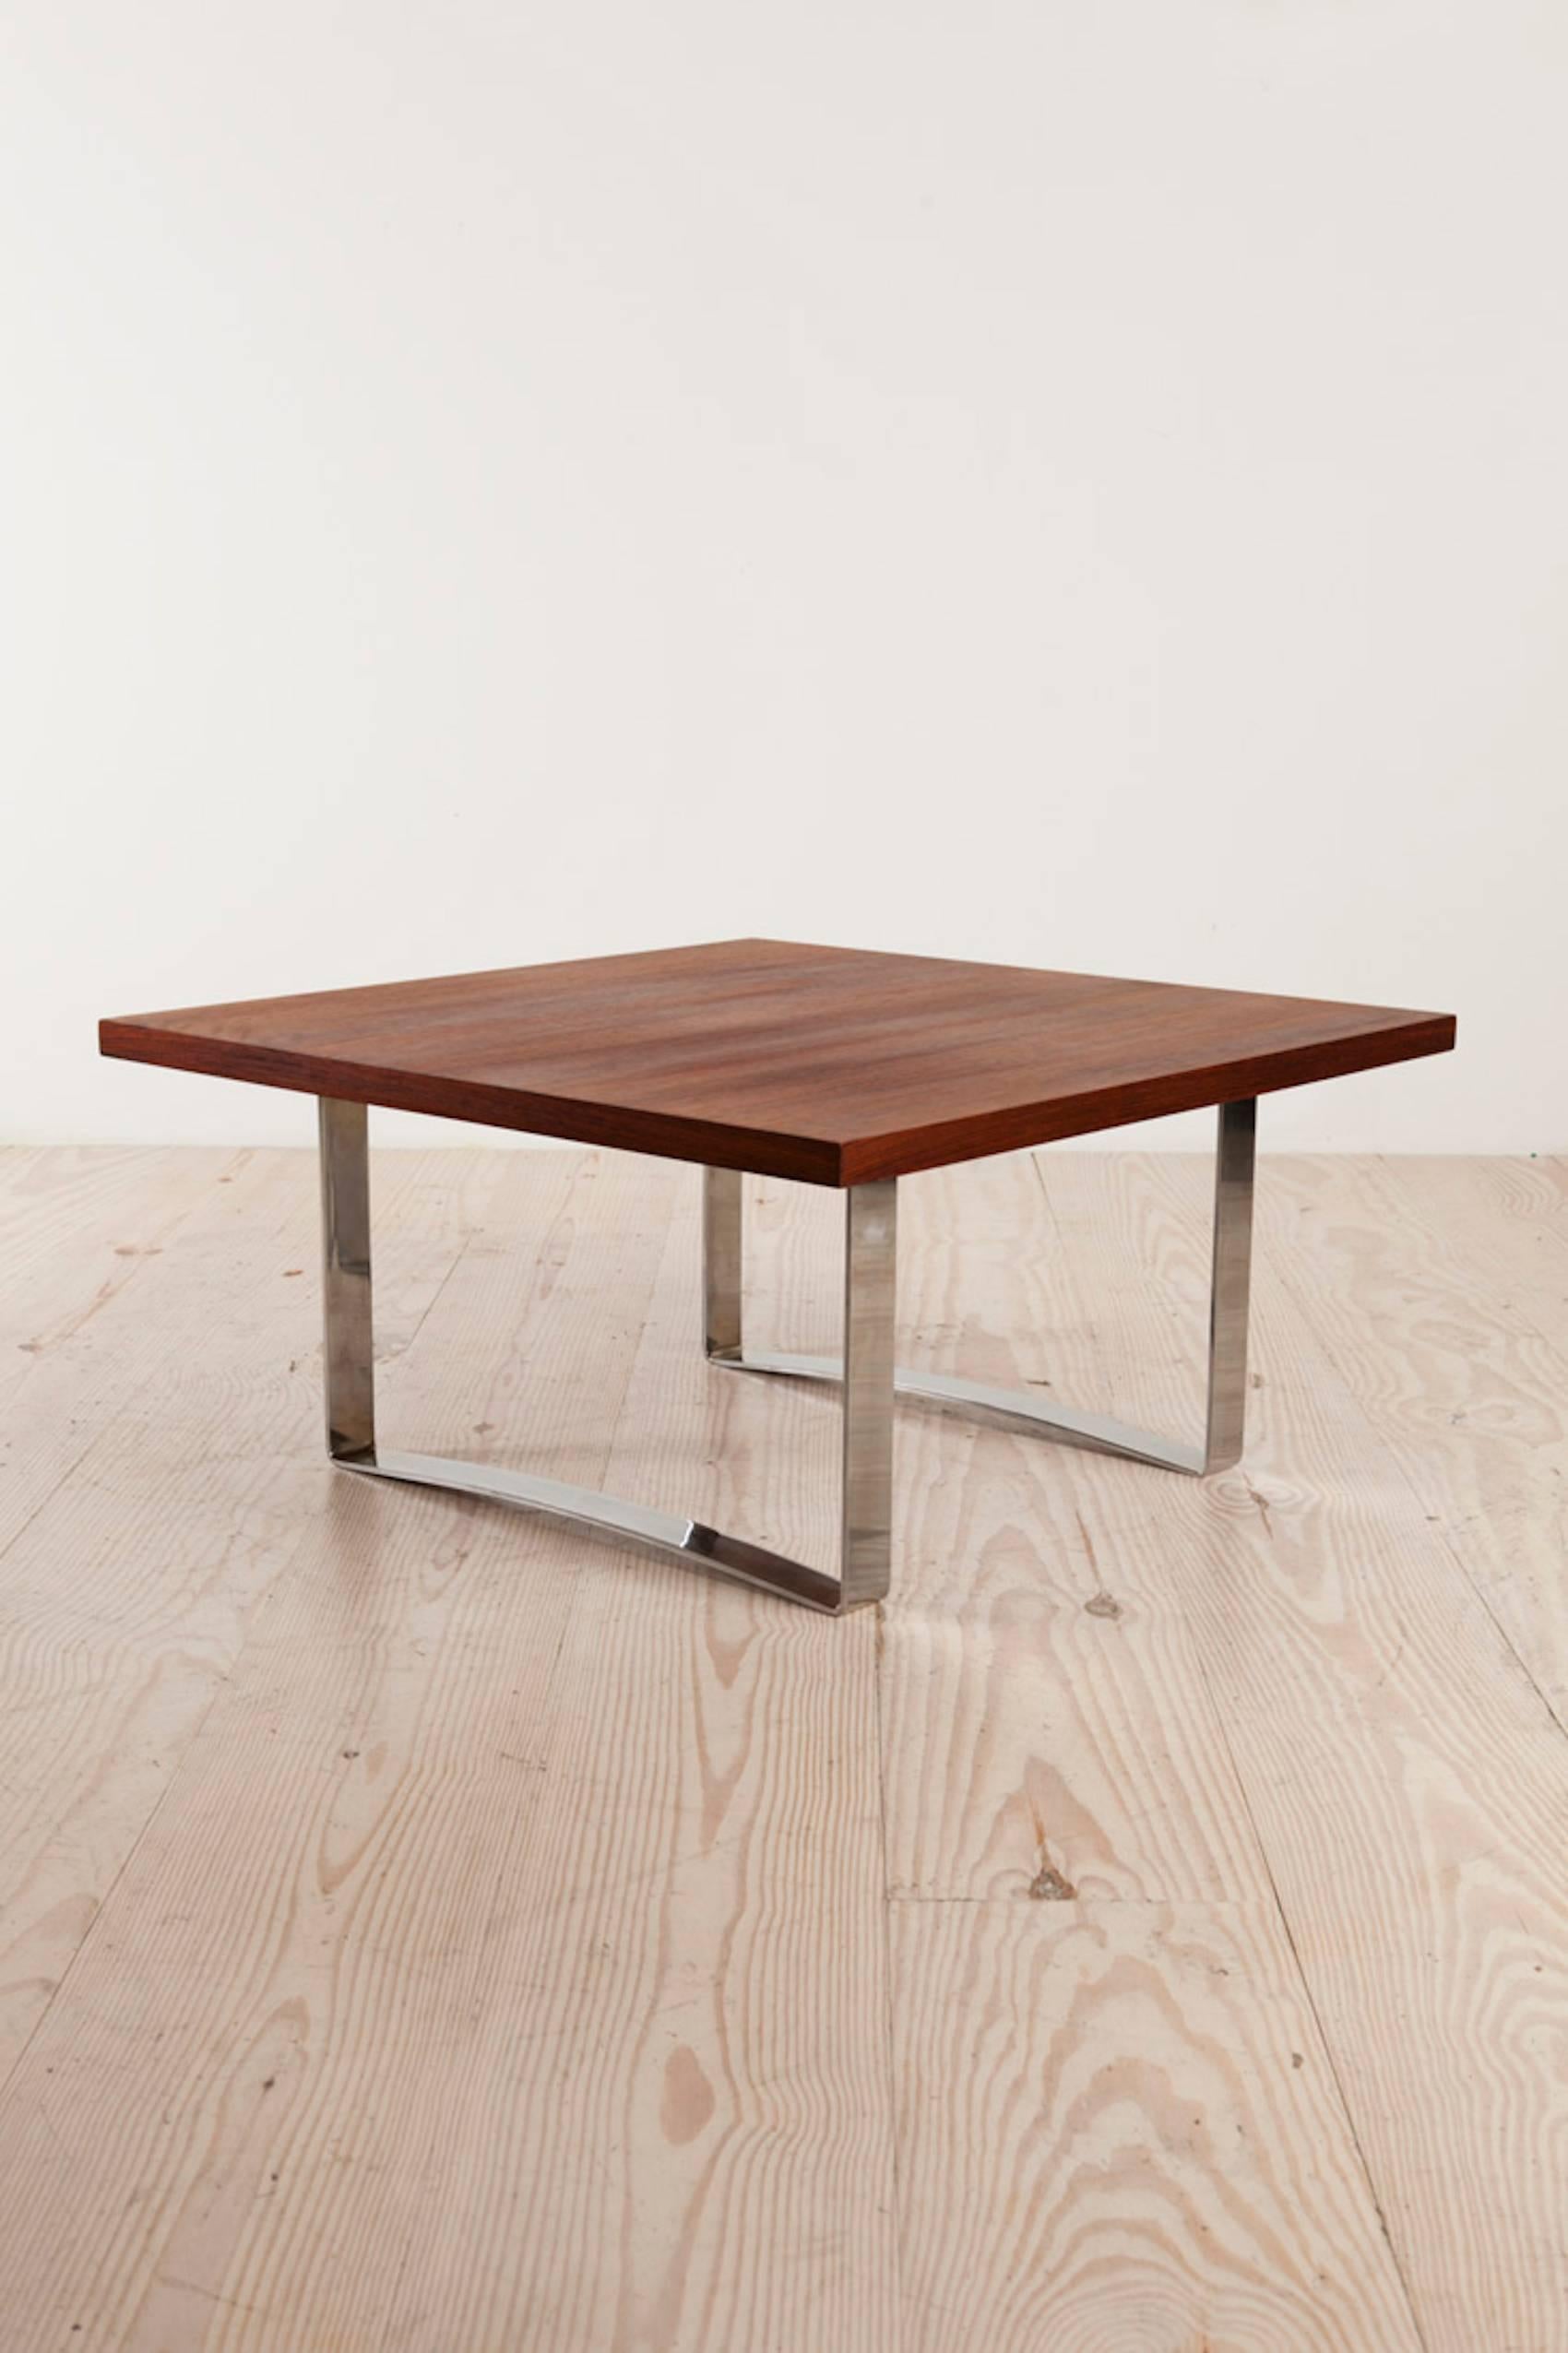 Bodil Kjaer Rare Low Square Coffee Table, circa 1959 In Excellent Condition For Sale In New York, NY